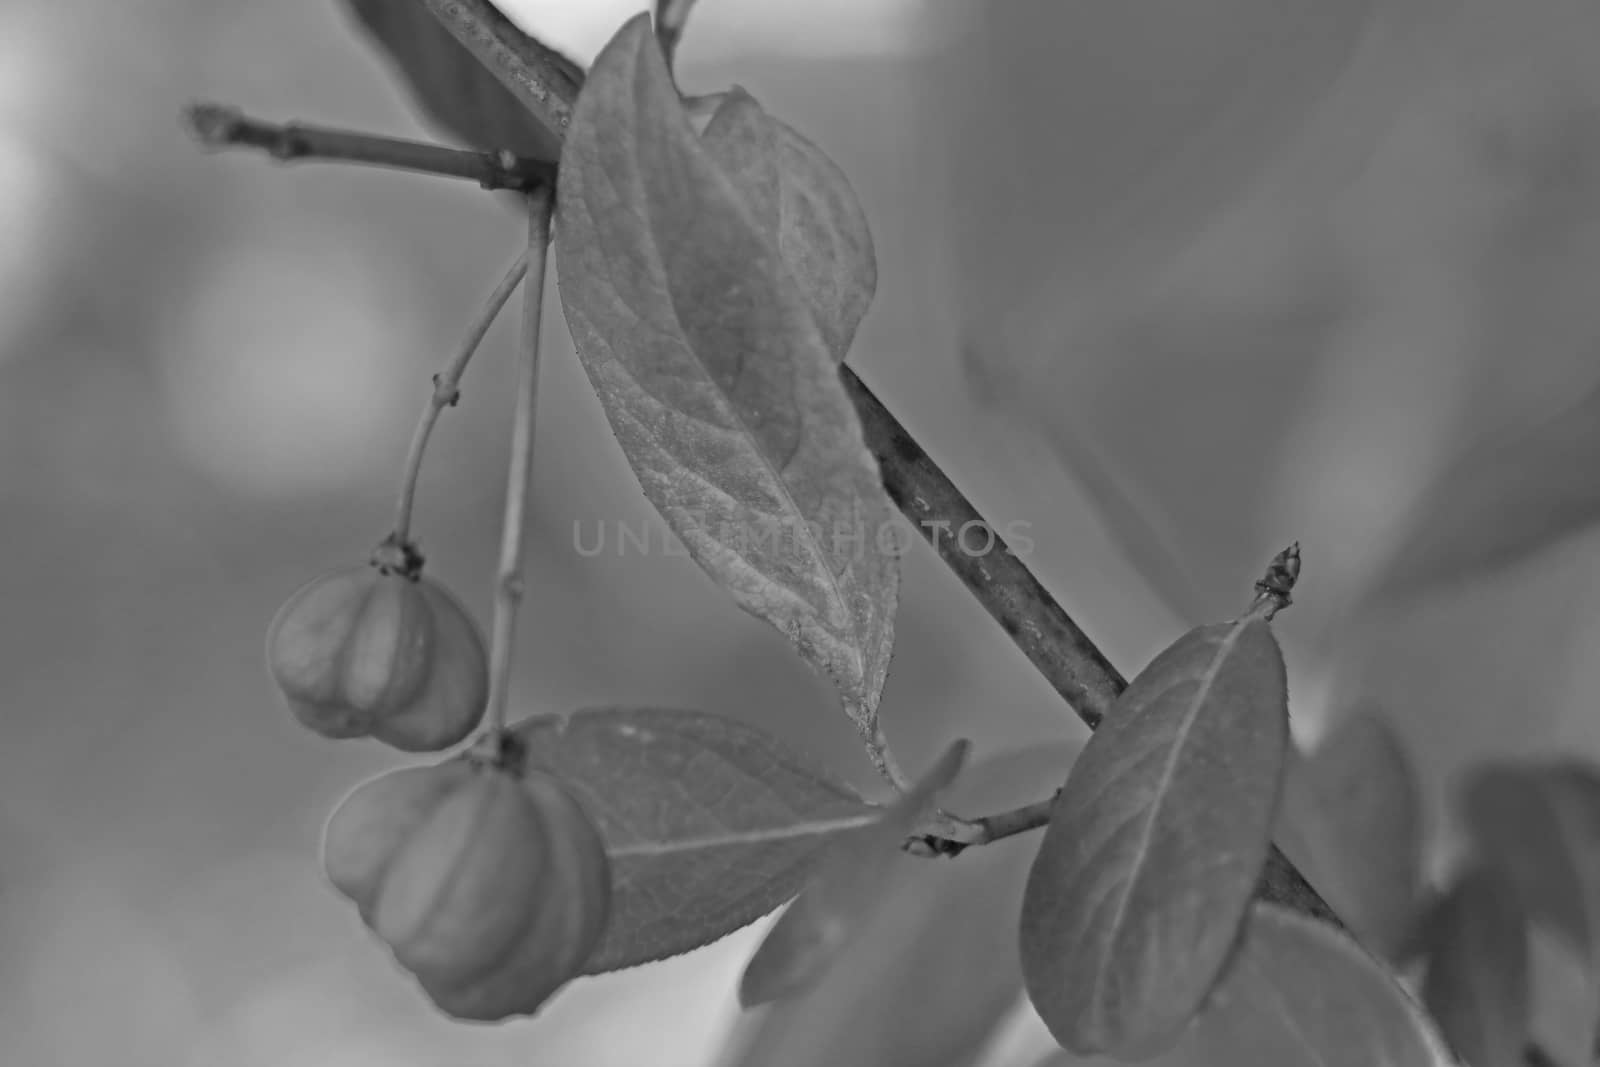 Red fruits on a tree in an early spring garden, black white photo. by kip02kas